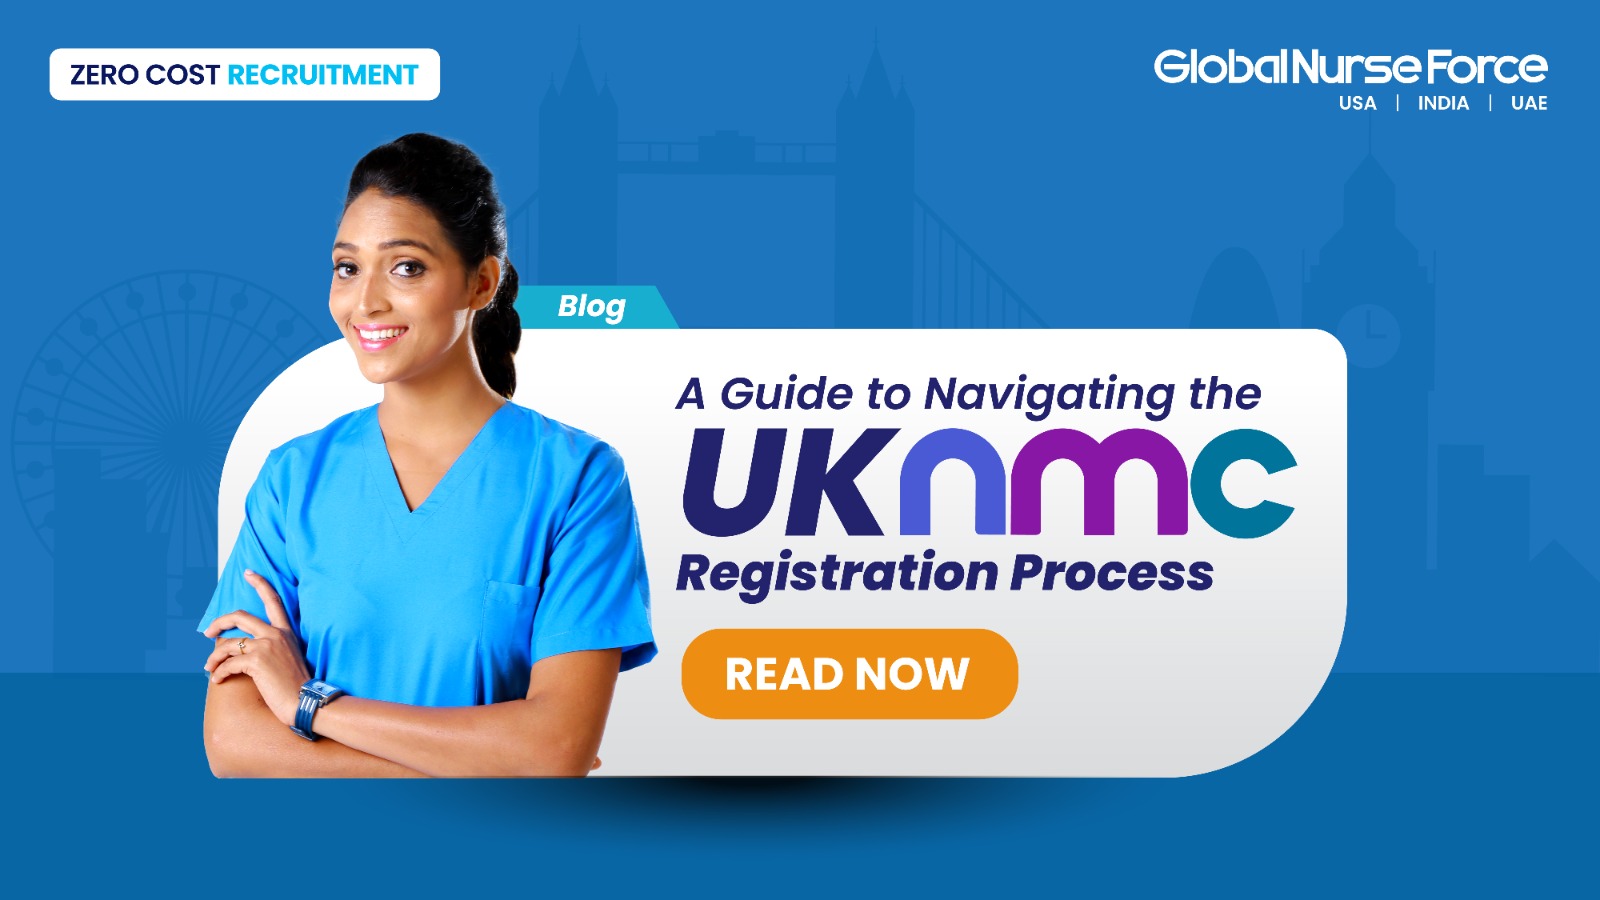 A Guide to Navigating the UK NMC Registration Process